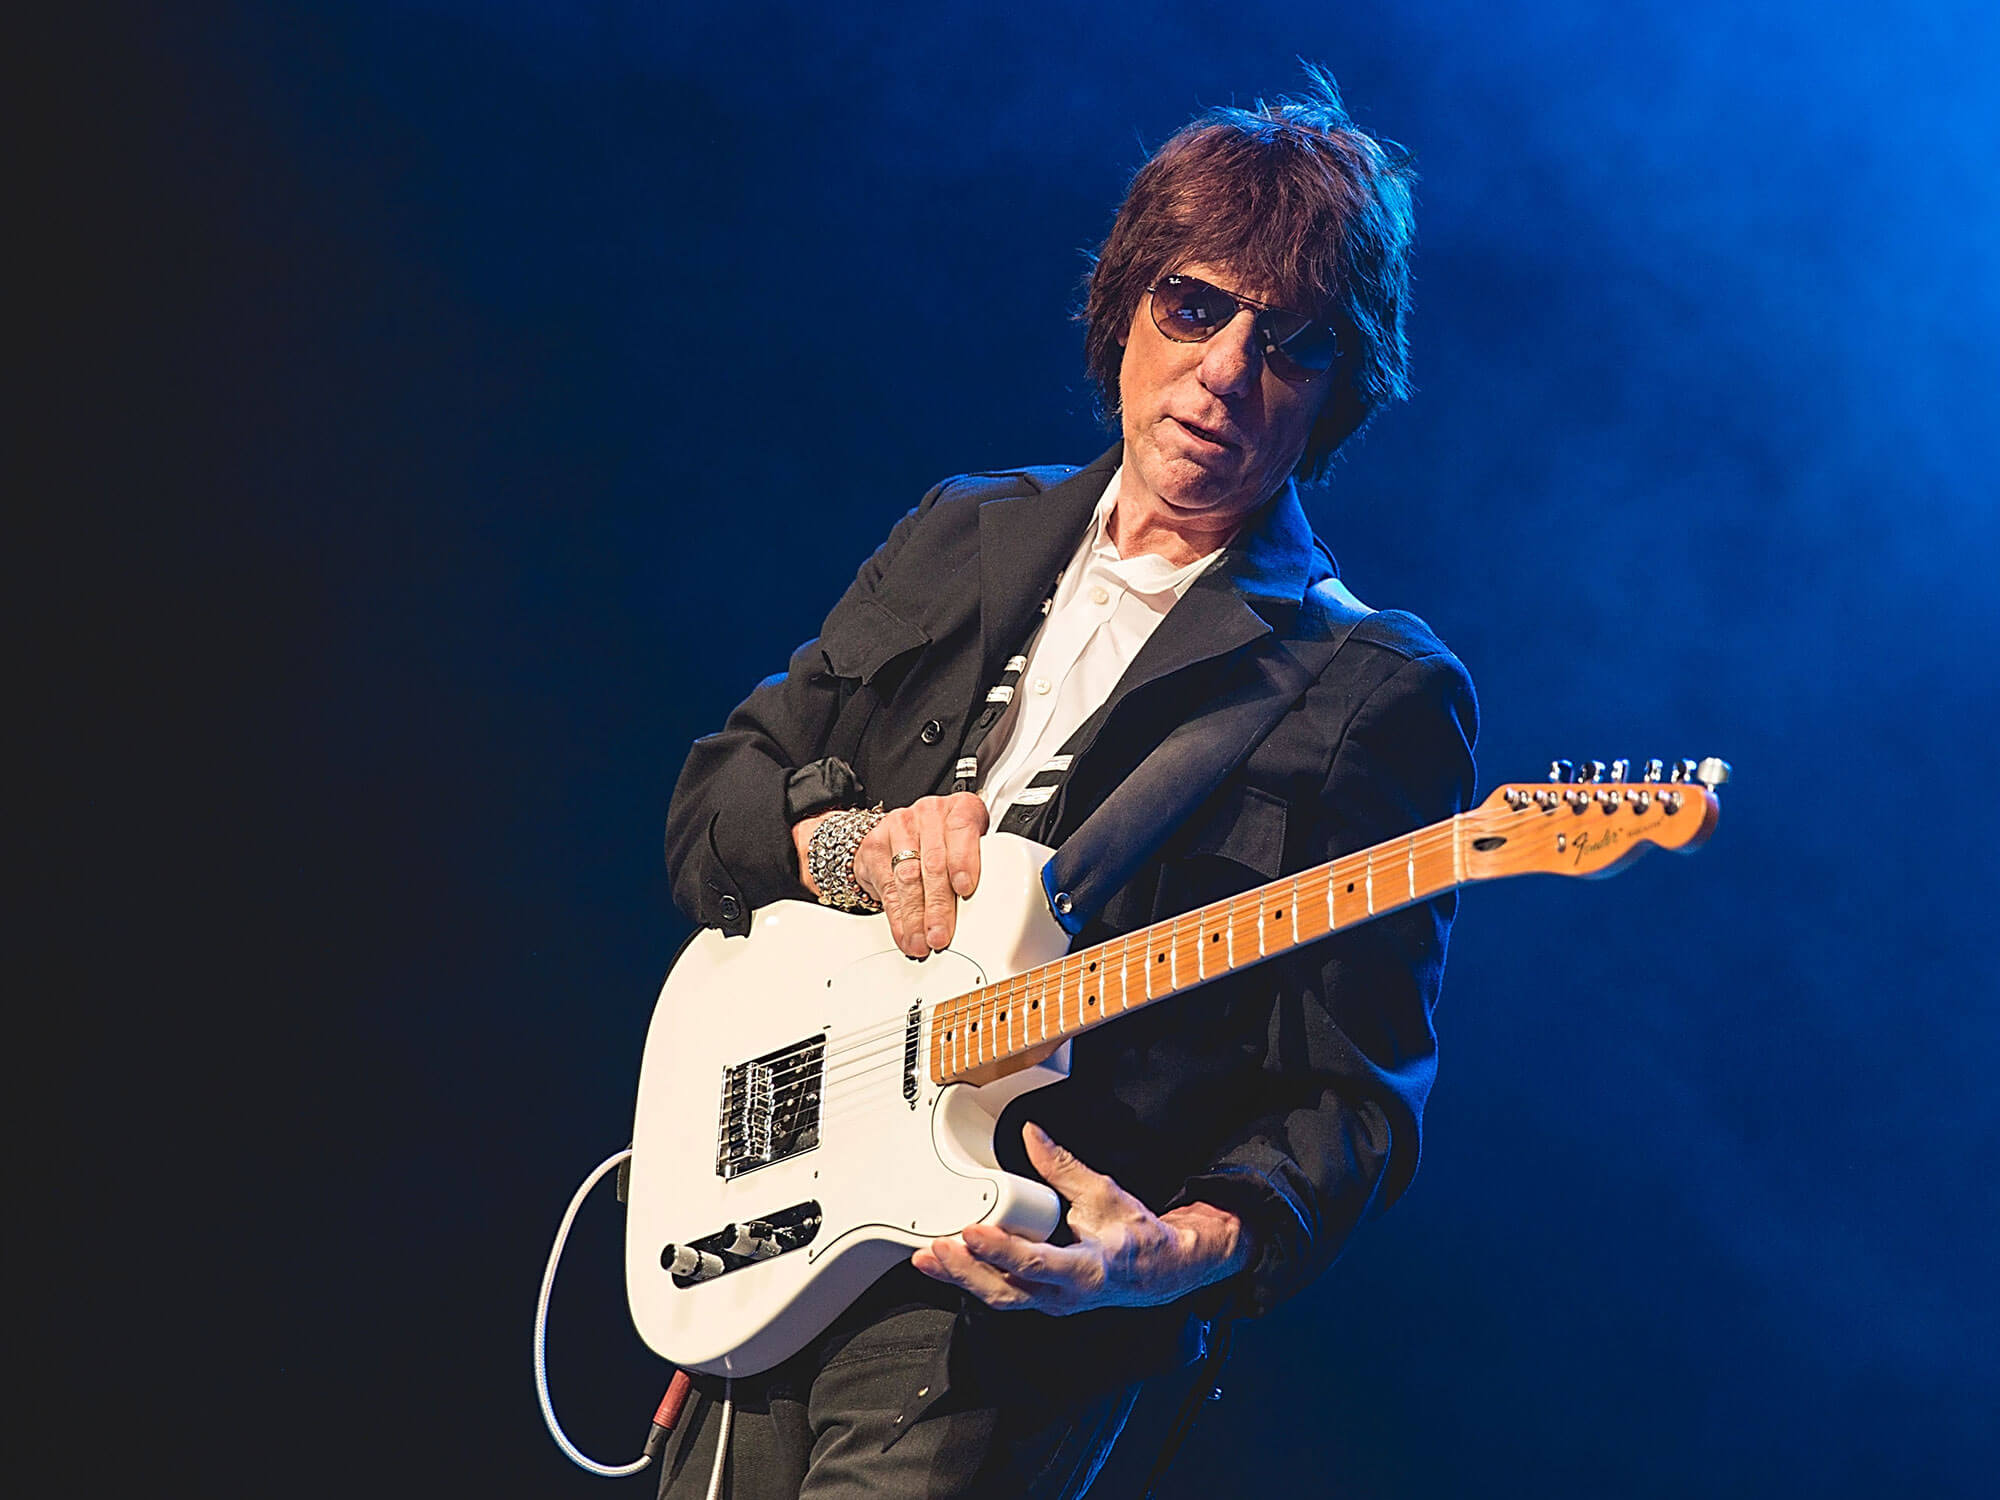 Jeff Beck performing live